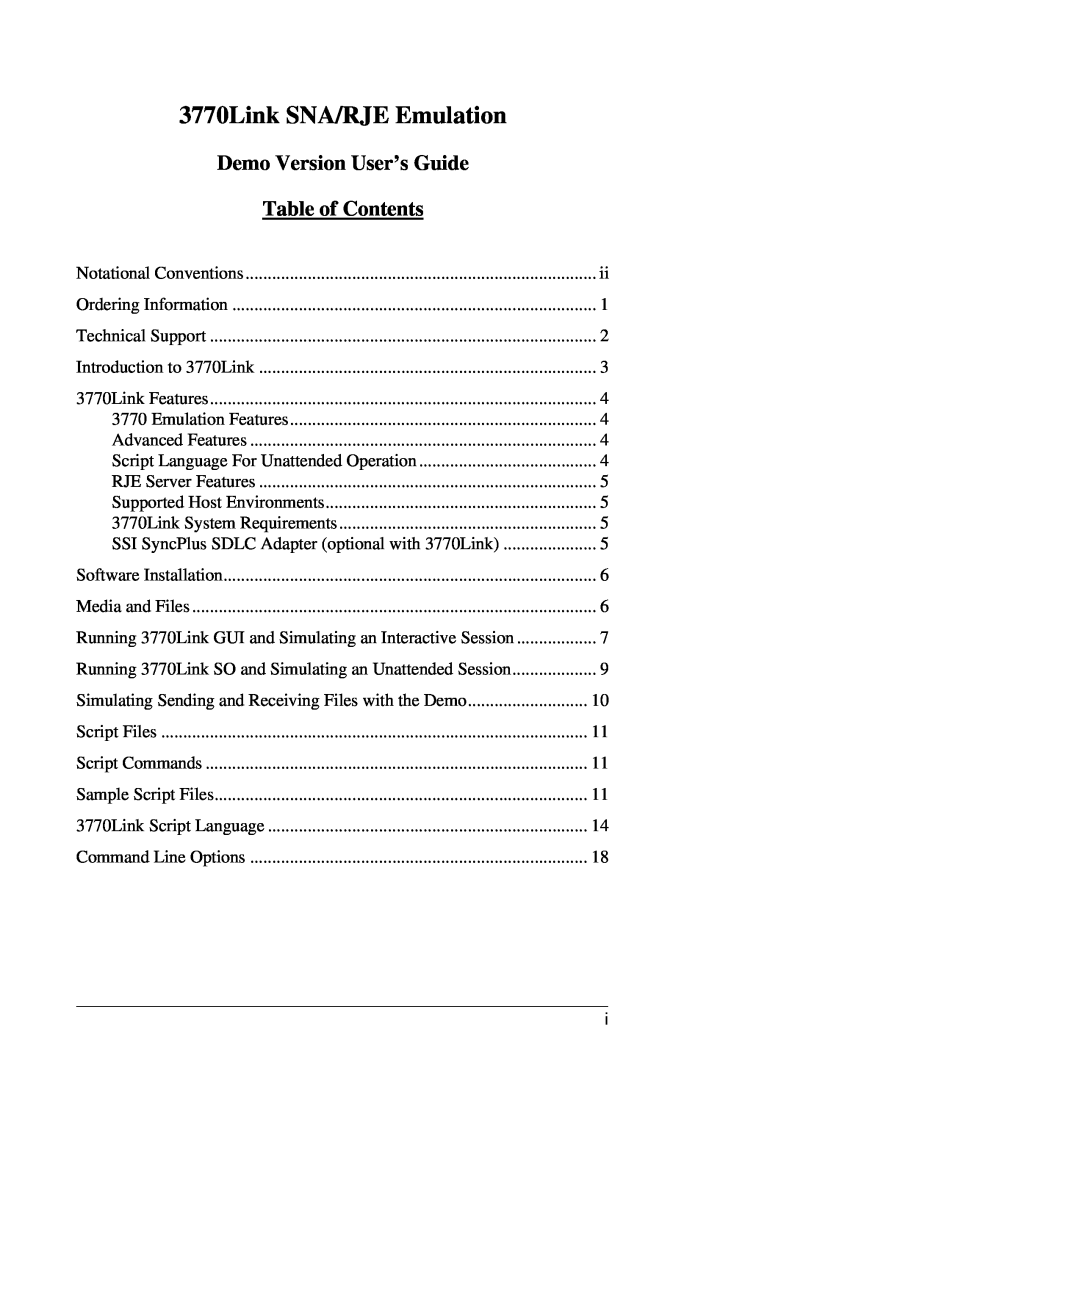 IBM manual Demo Version User’s Guide, Table of Contents, 3770Link SNA/RJE Emulation 